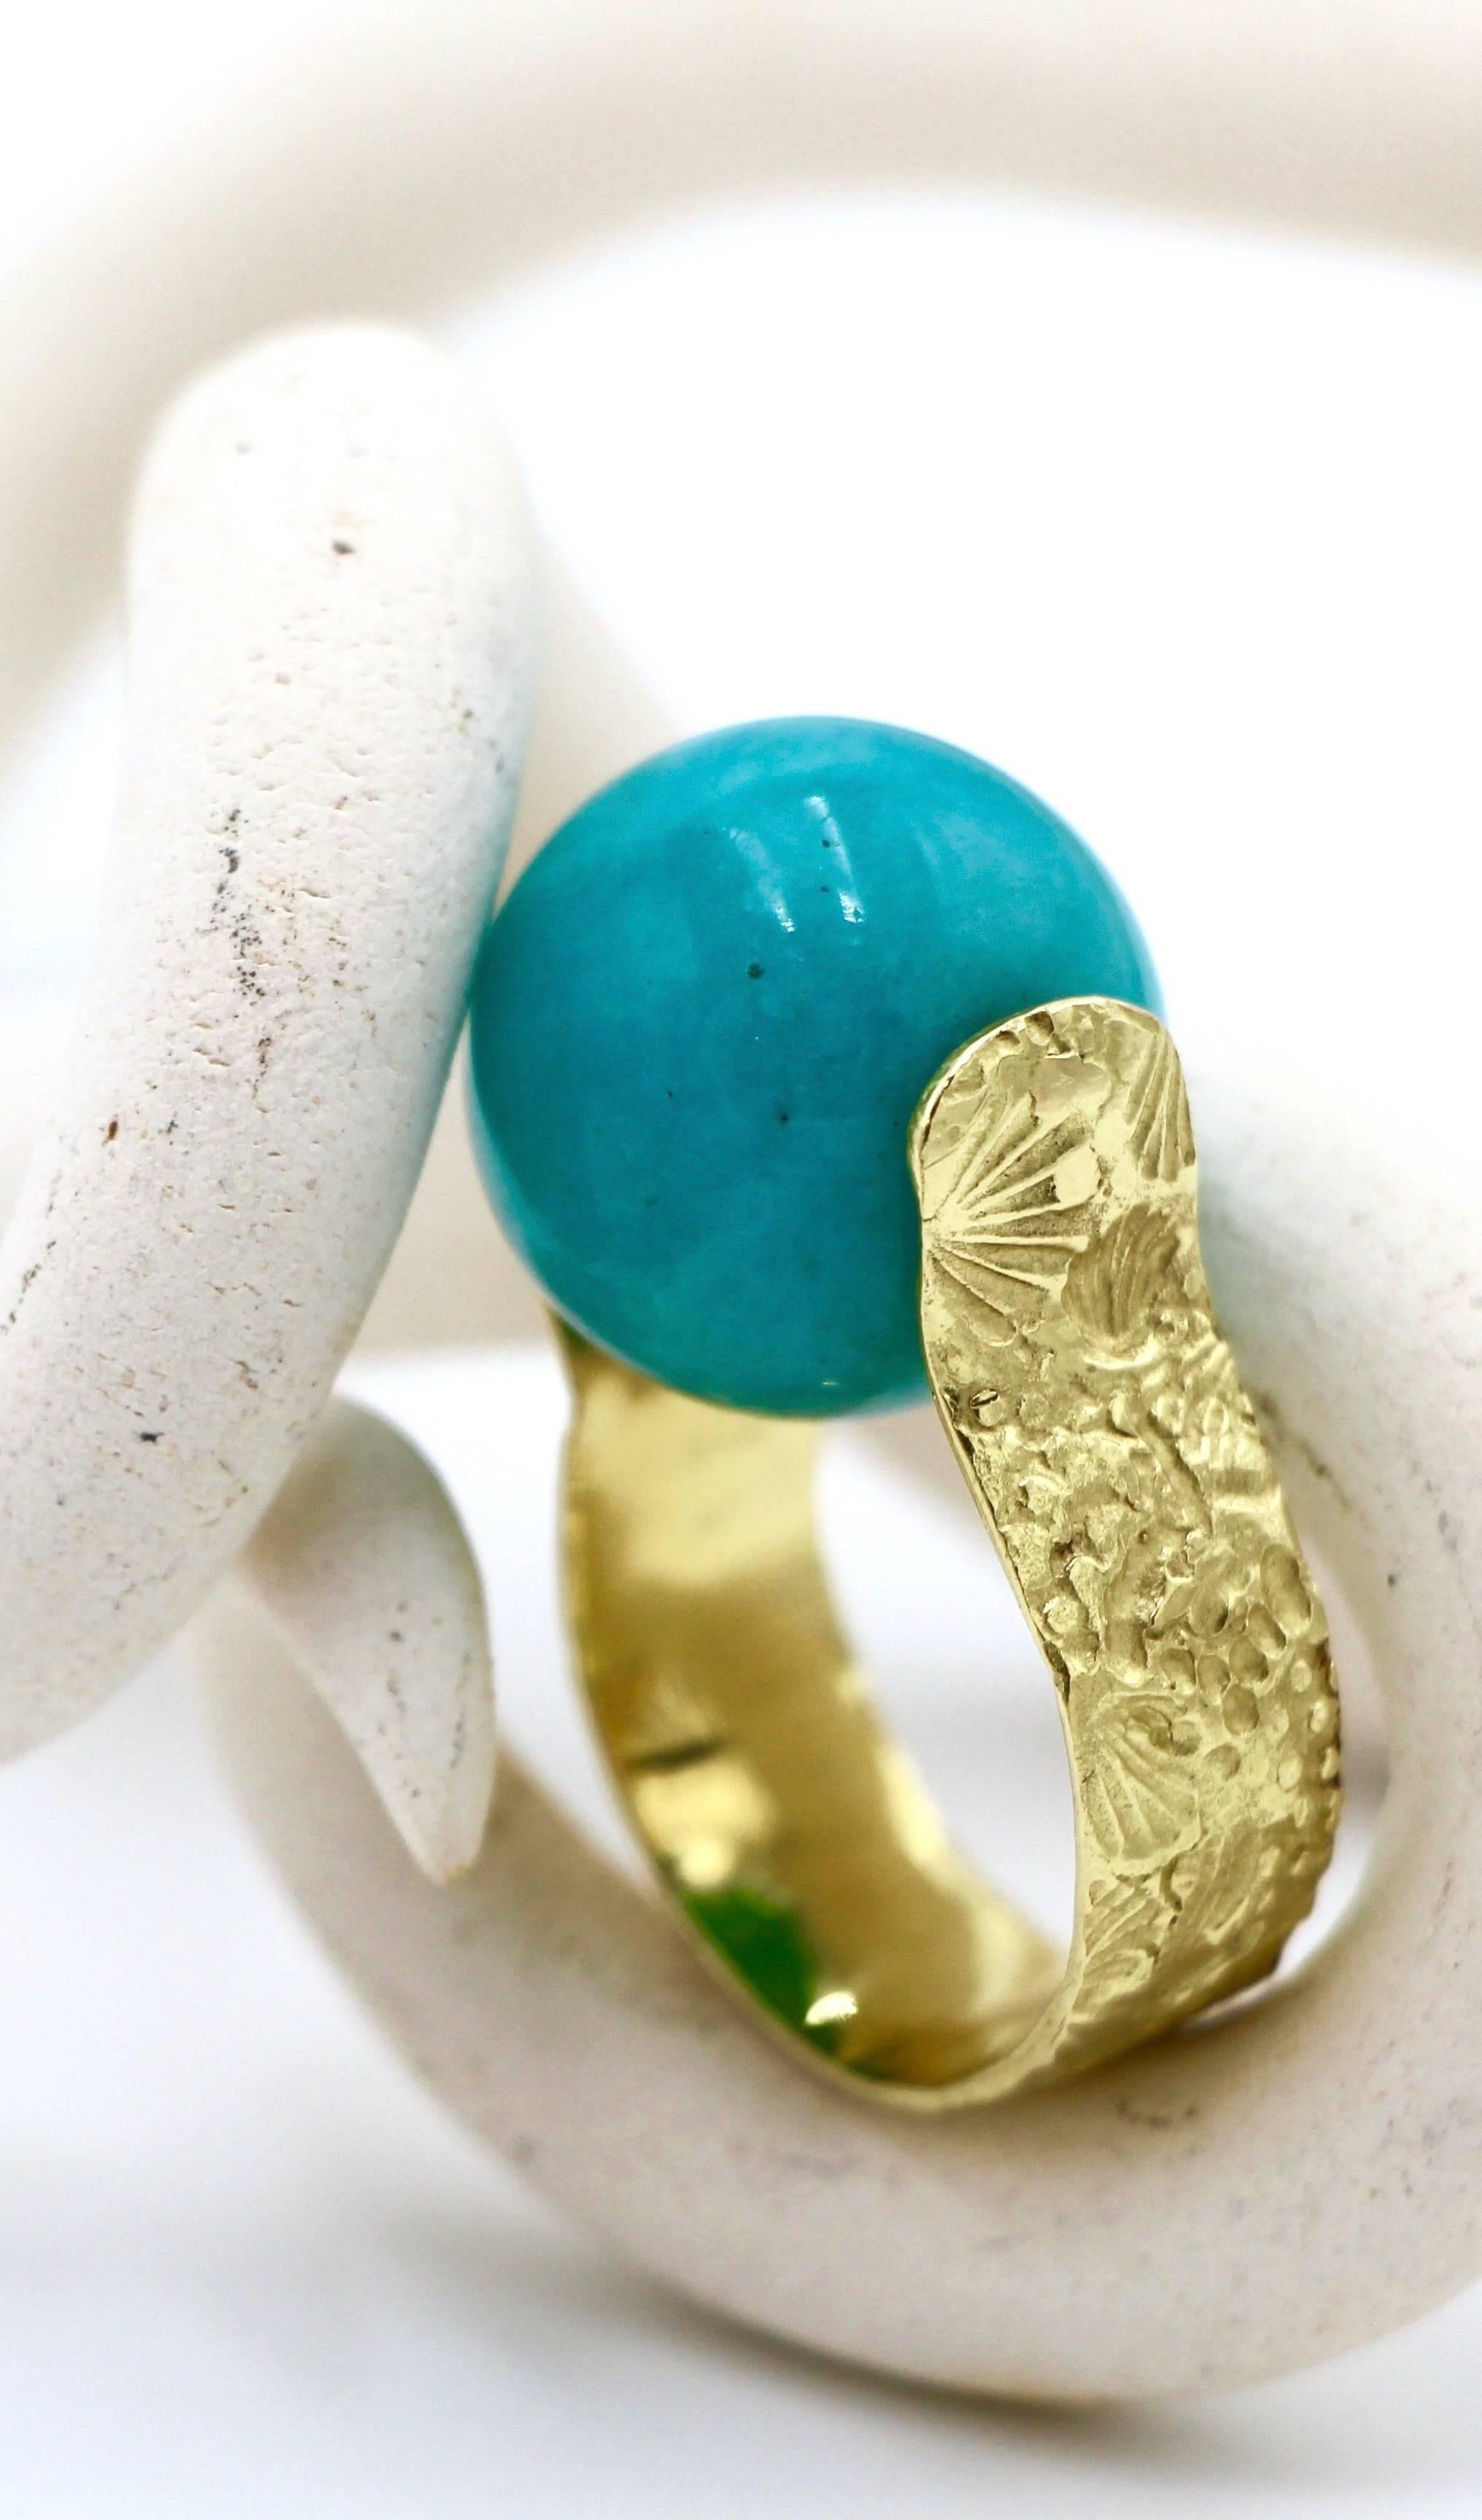 Amazonite Sea Urchin Ring, set in 18 Karat Gold, is stunningly bold statement piece. The unique setting allows for the stone to securely spin.

Dimensions of Amazonite: 18.03mm
Dimensions of Band: 8.31mm x 1.03mm

Ring size*: 9 1/2

*Ring can be